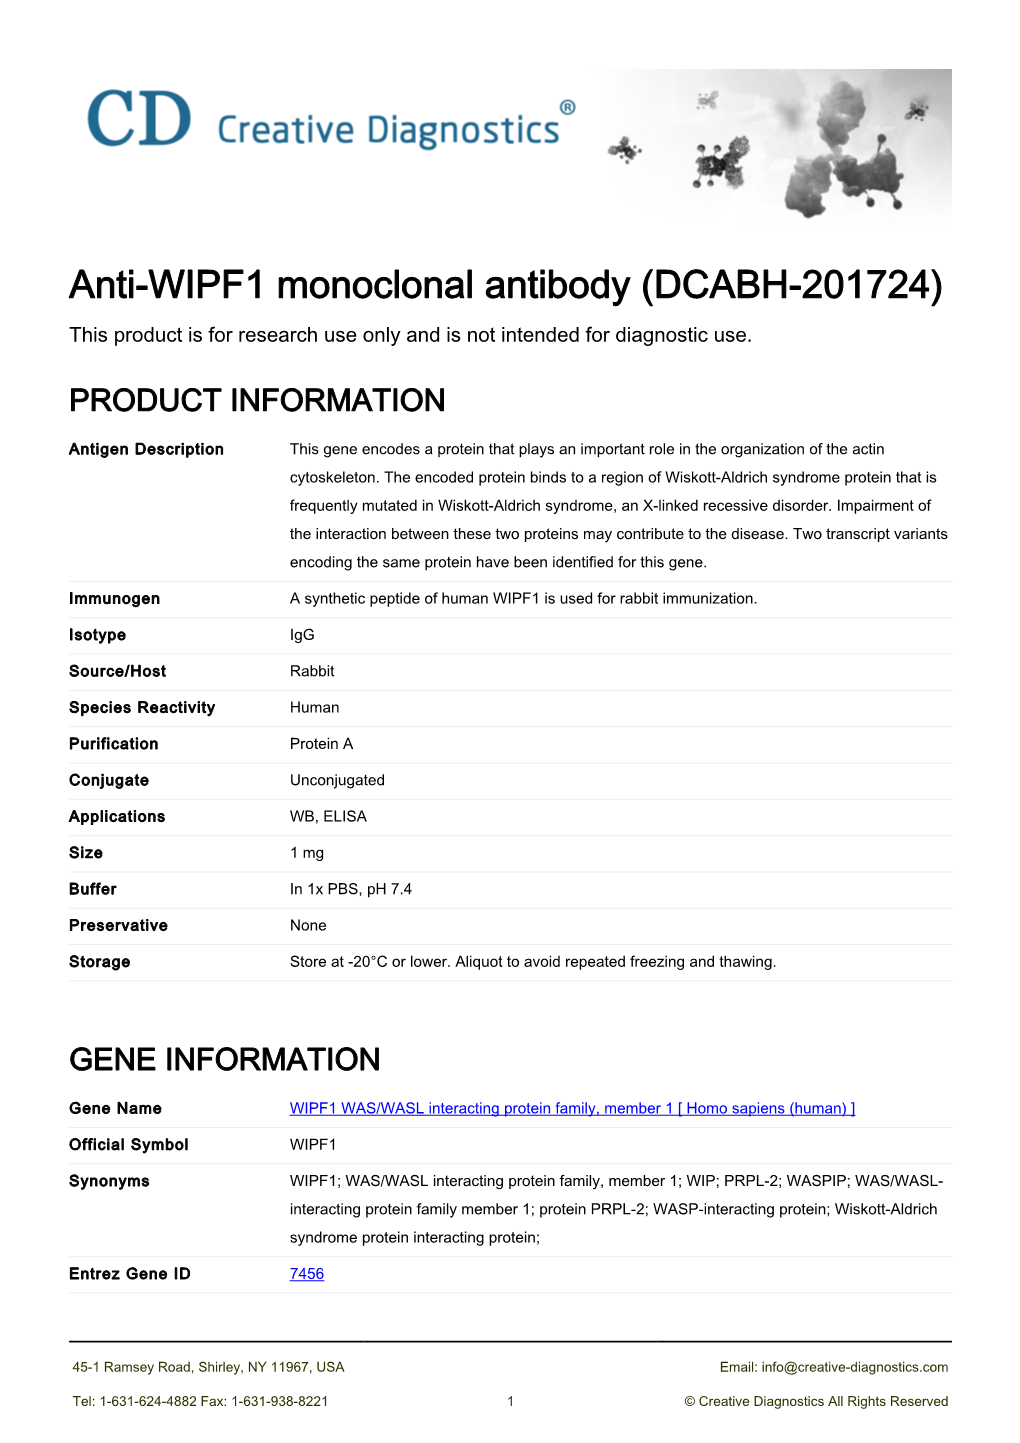 Anti-WIPF1 Monoclonal Antibody (DCABH-201724) This Product Is for Research Use Only and Is Not Intended for Diagnostic Use